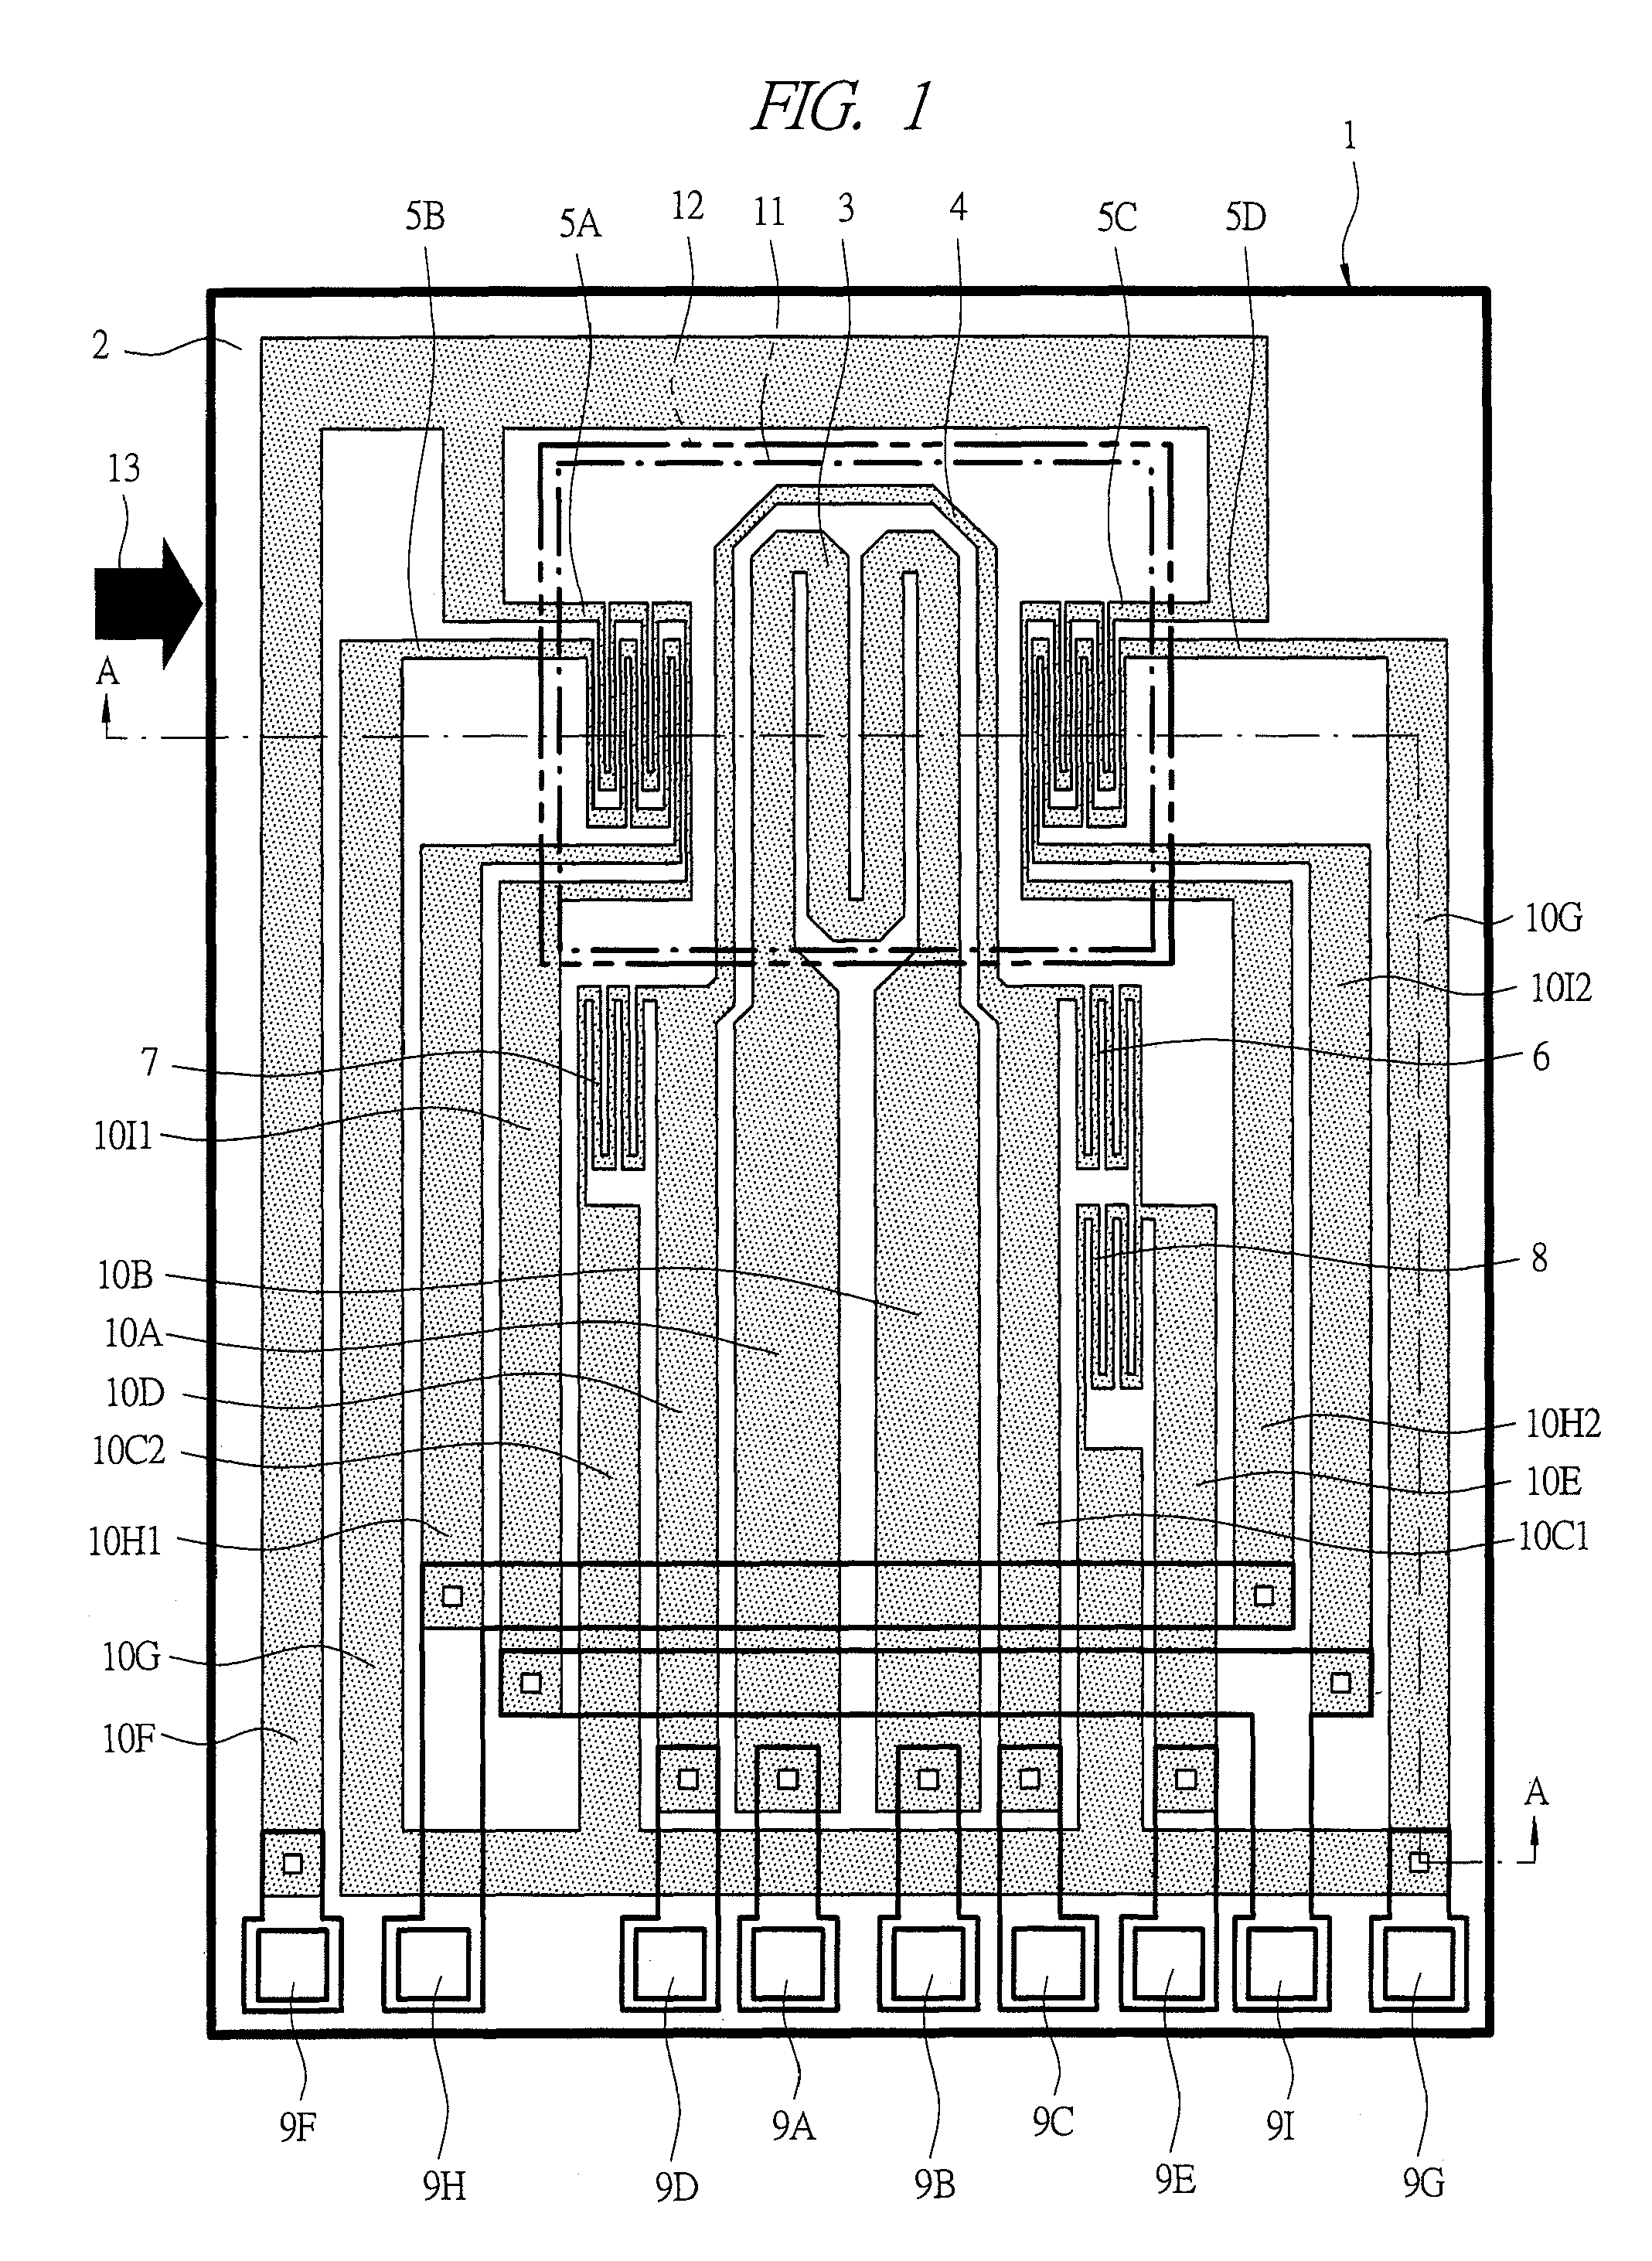 Thermal fluid flow sensor having stacked insulating films above and below heater and temperature-measuring resistive elements